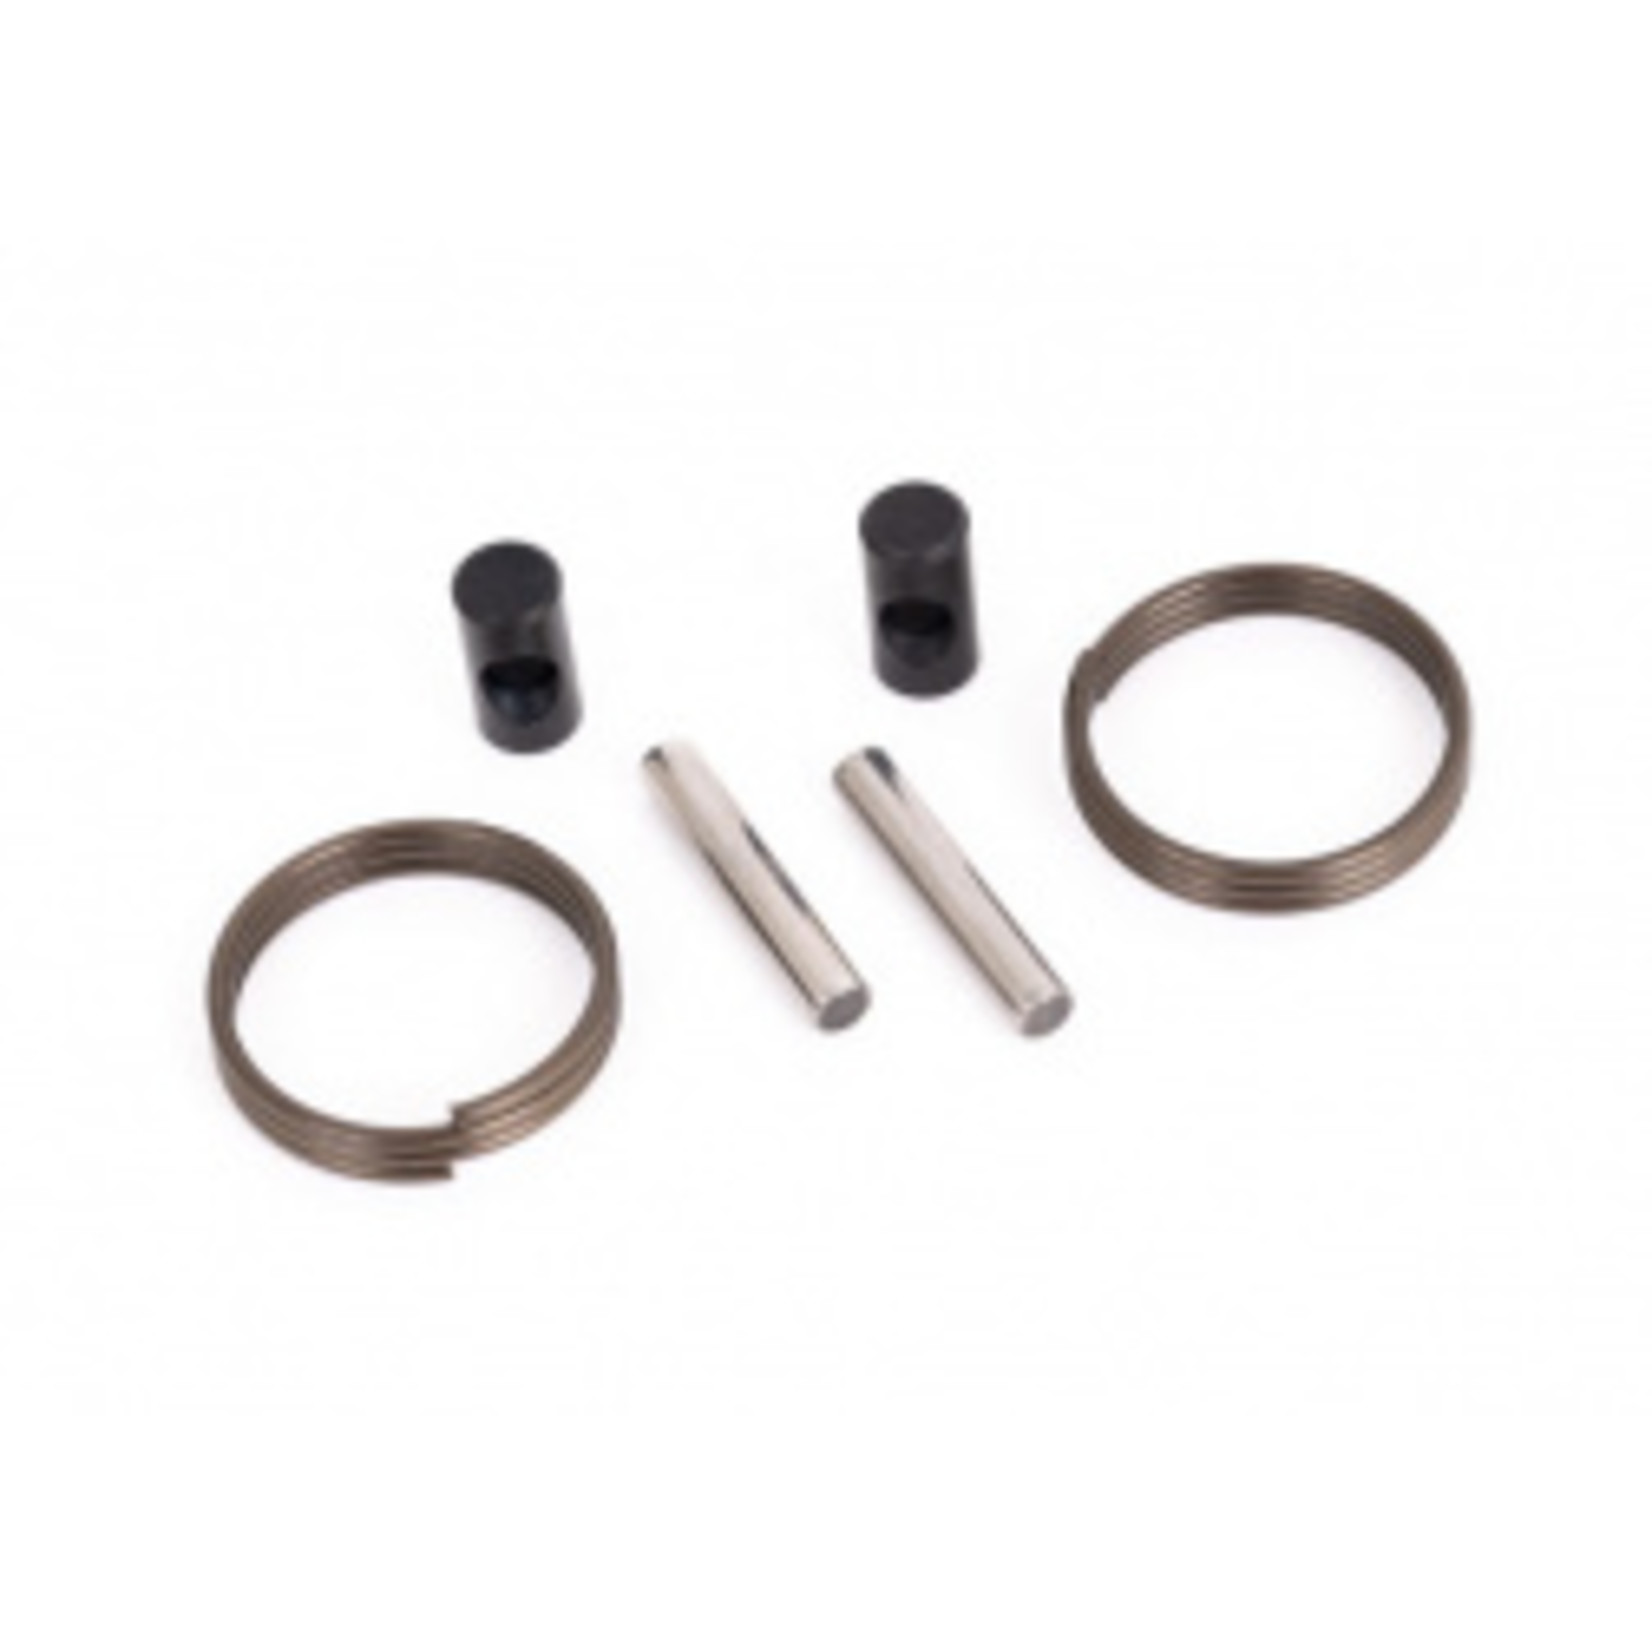 Traxxas 9551 Rebuild kit, steel constant-velocity driveshaft (includes pins for 2 driveshaft assemblies) (for #9550 front or #9654X rear steel CV driveshafts)